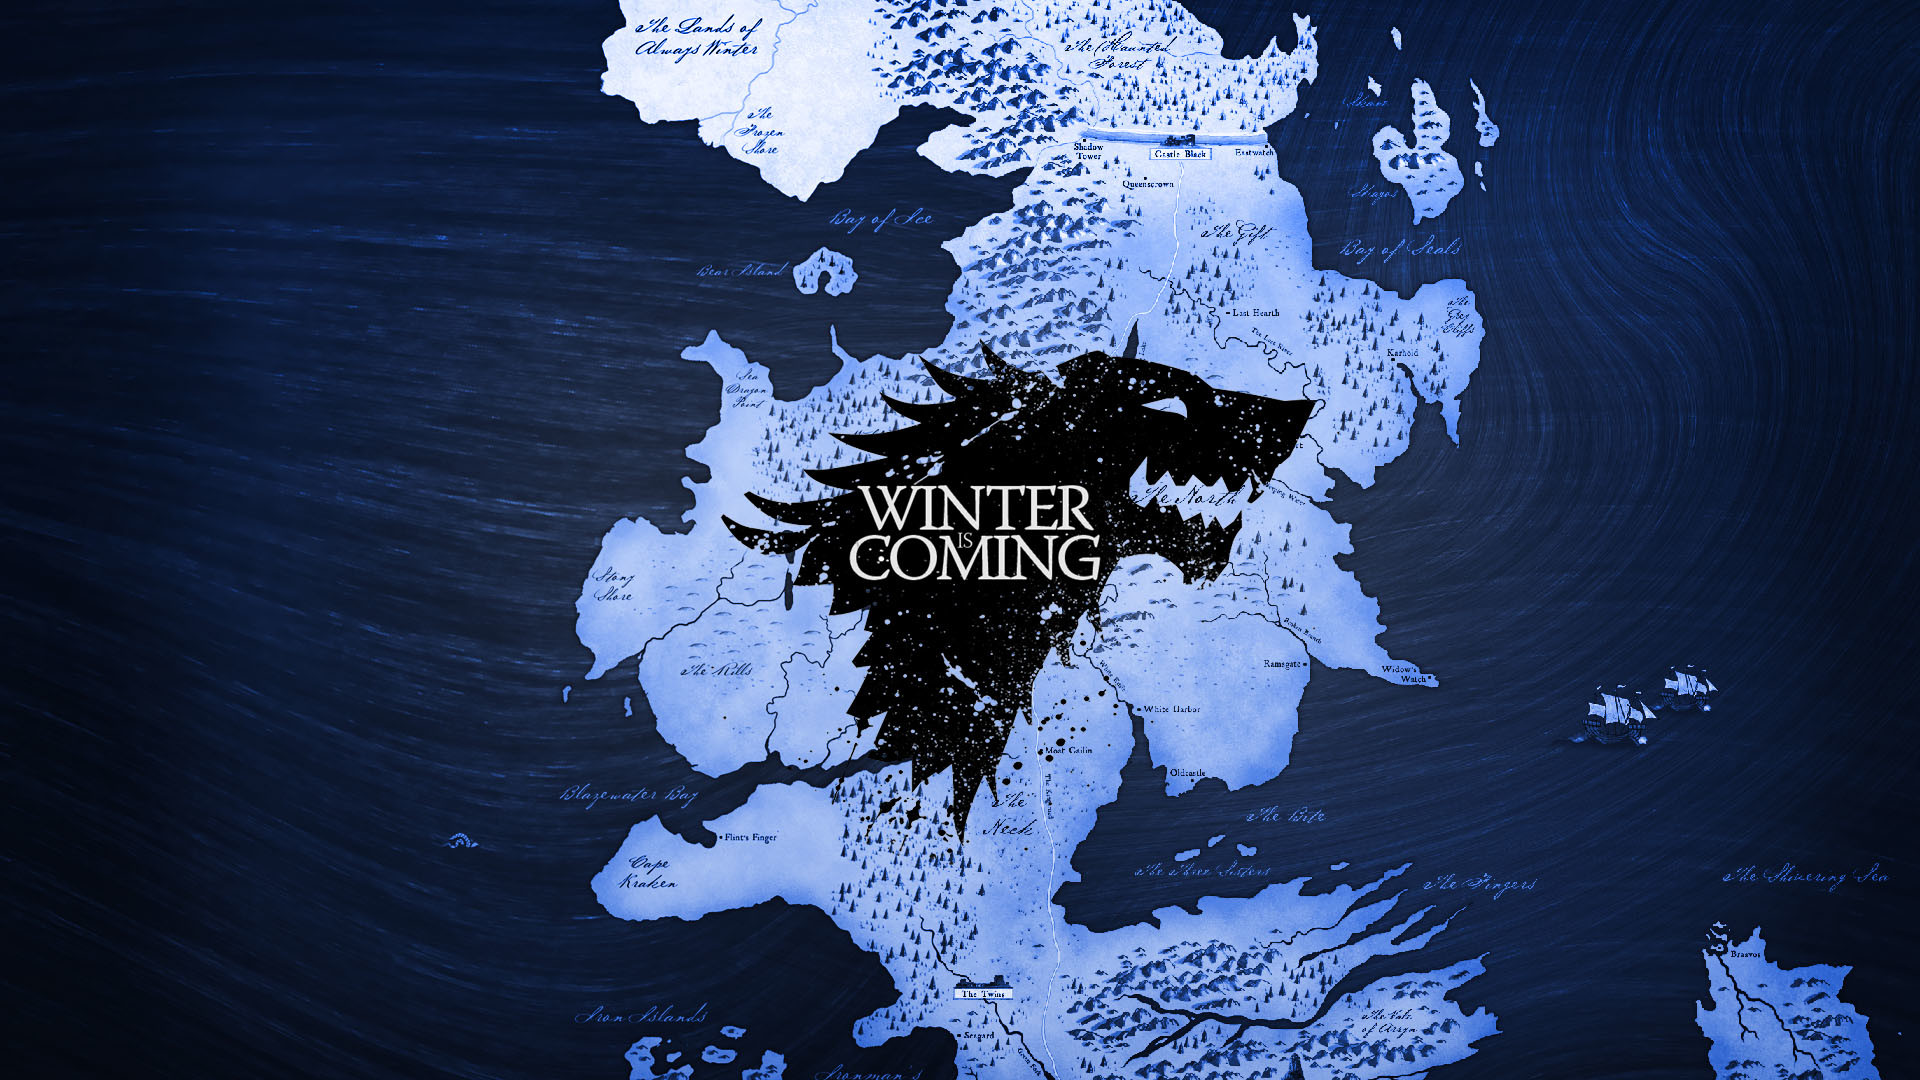 Game Of Thrones Wallpaper Winter Is Coming HD Image Wallpaper